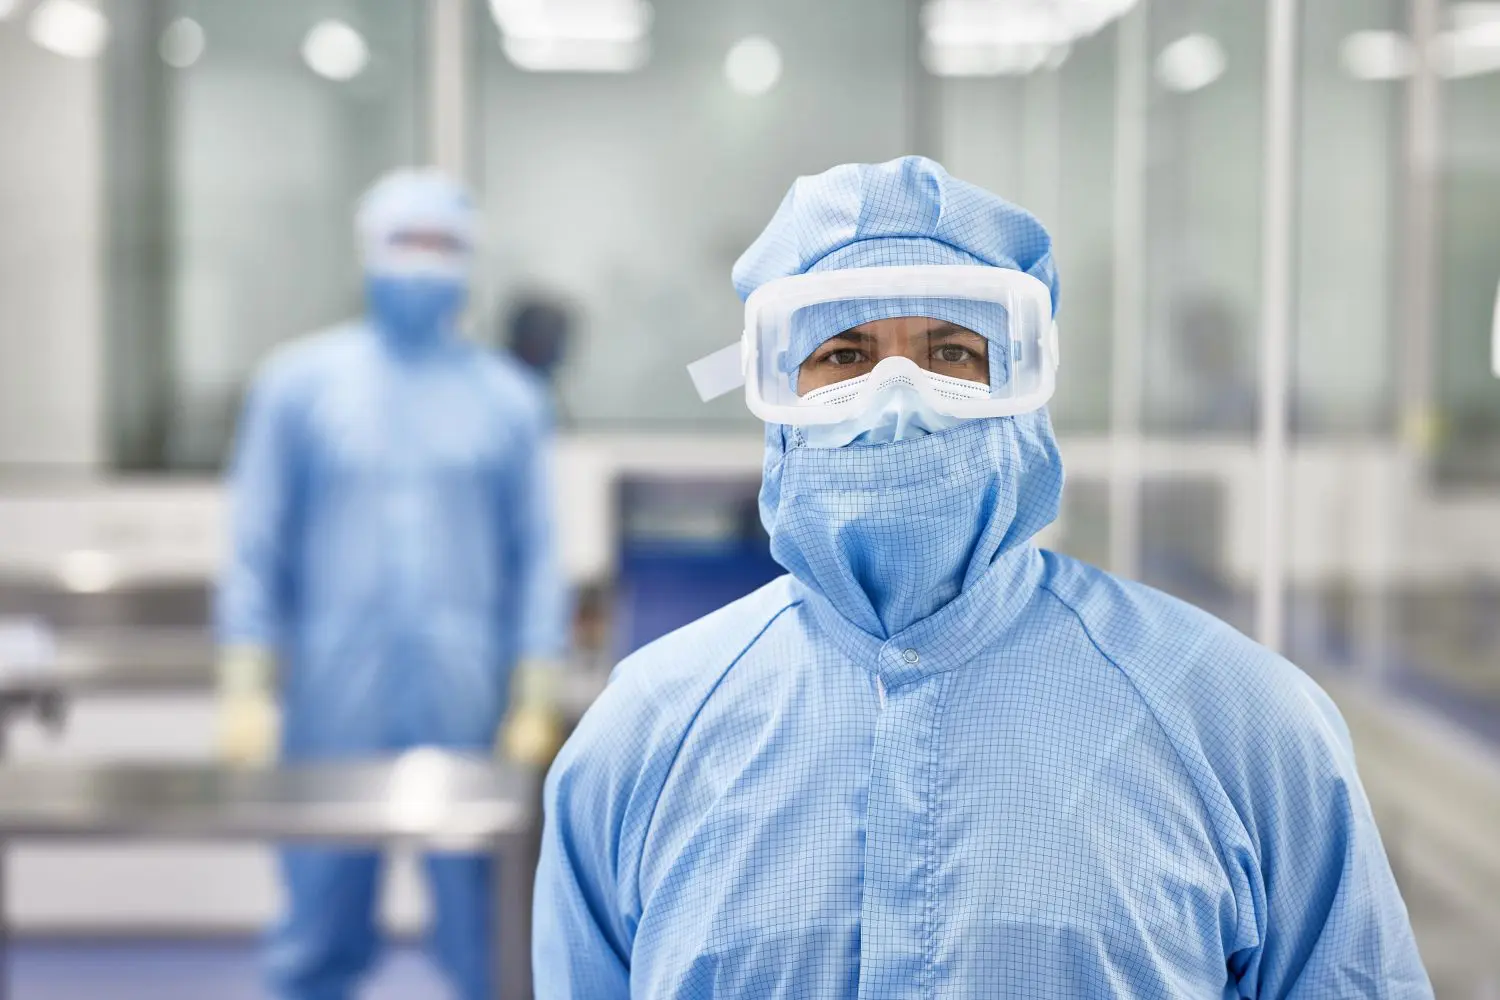 Two people in blue lab coats and masks